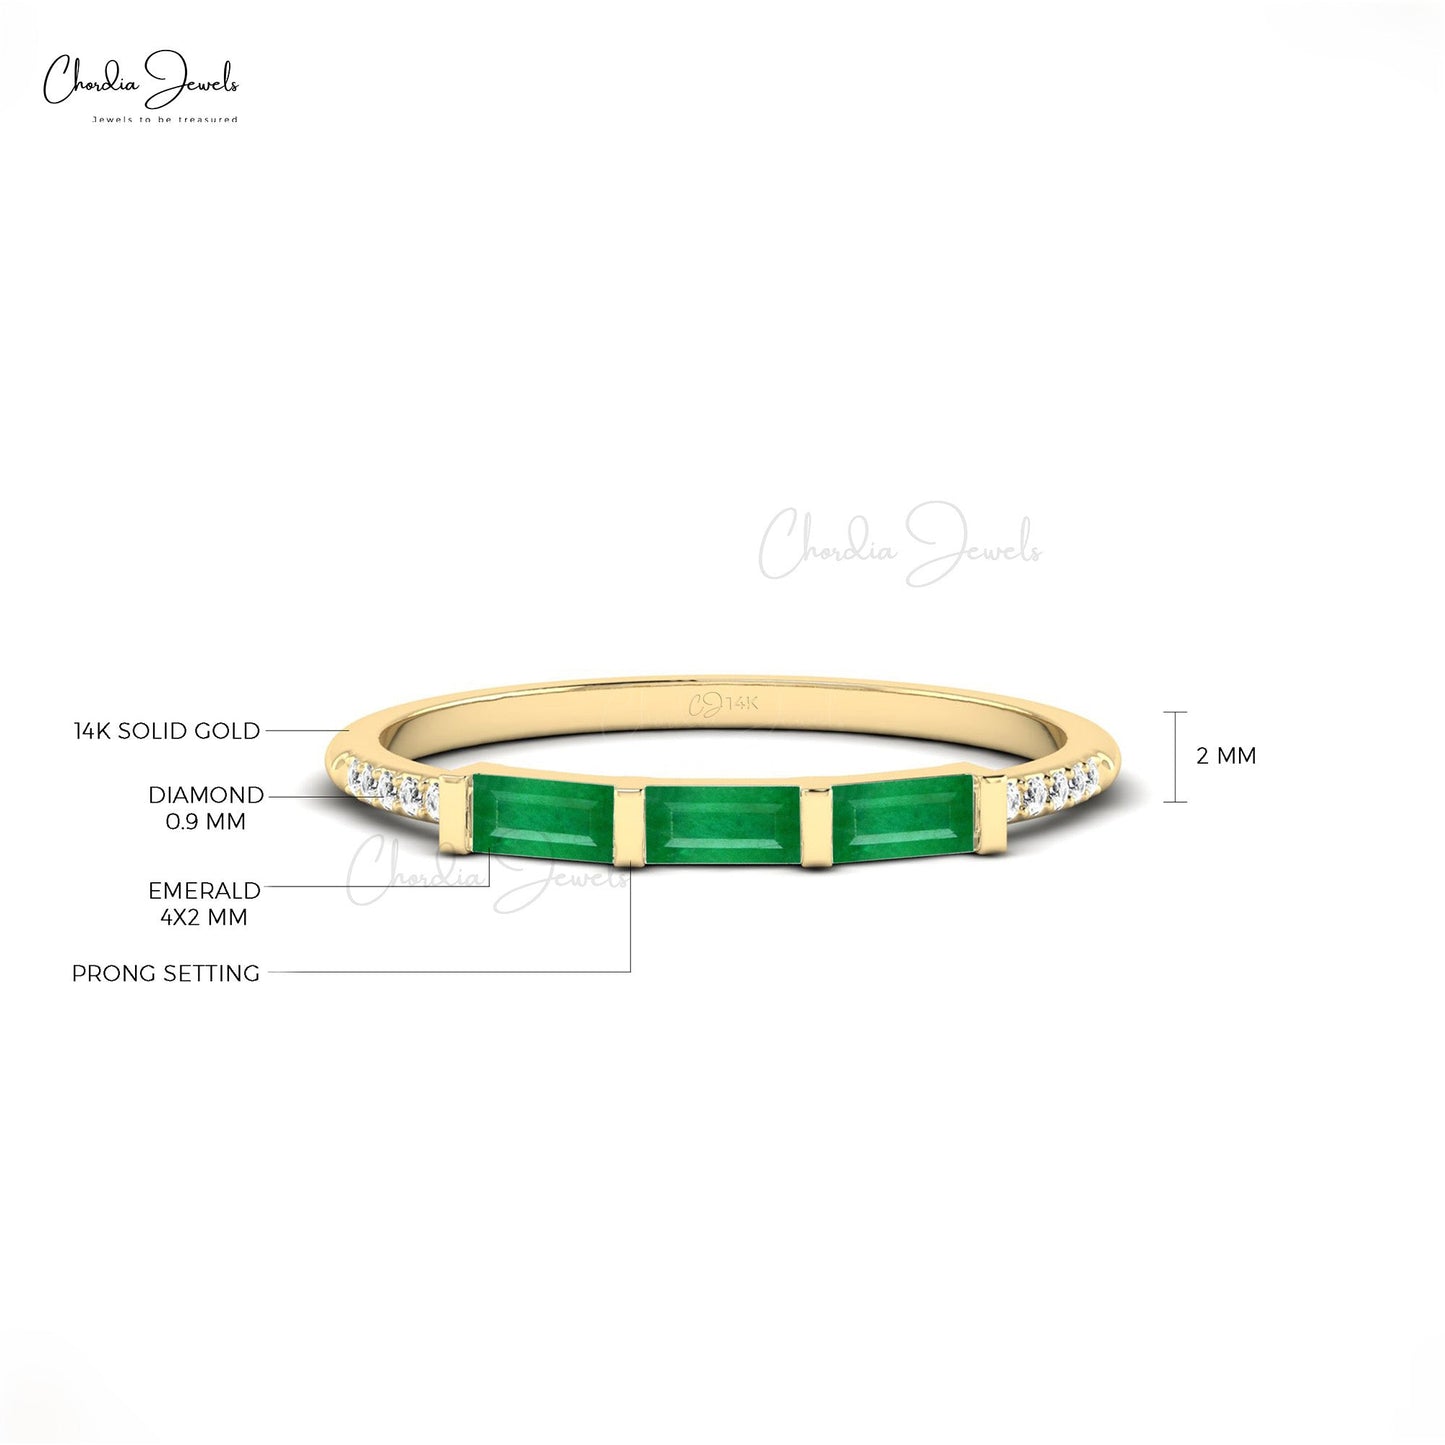 Round Diamond Baguette Cut Emerald Ring in 14k Solid Gold